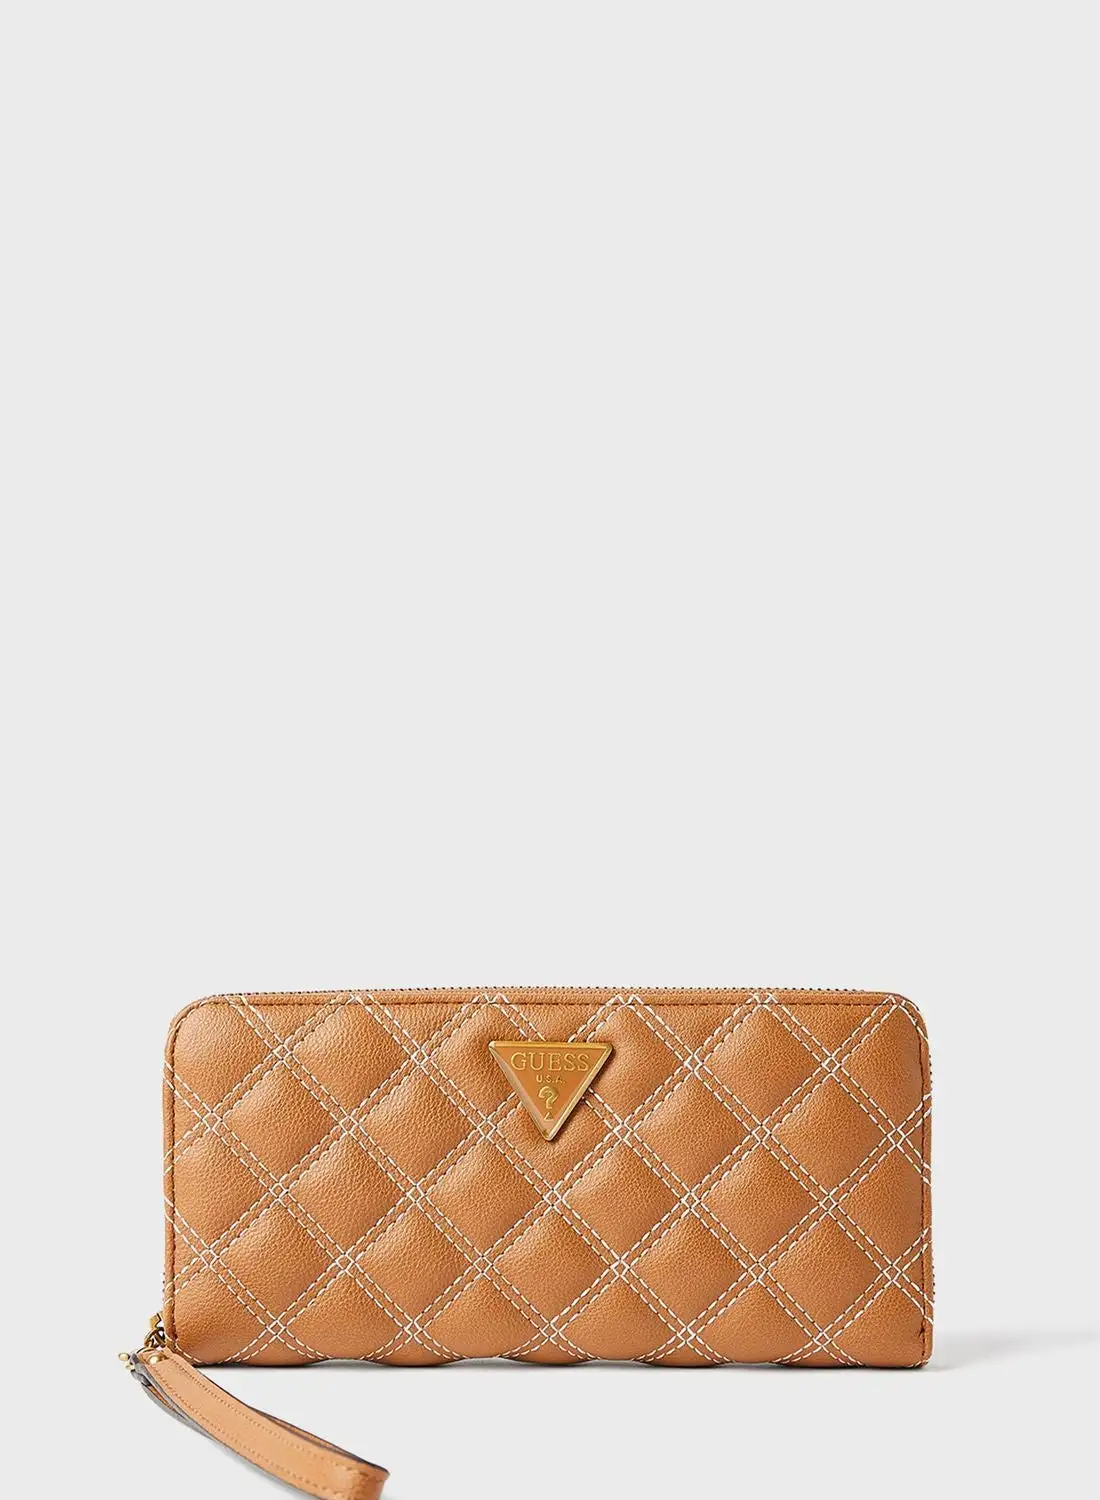 GUESS Cessily Zip Around Wallet